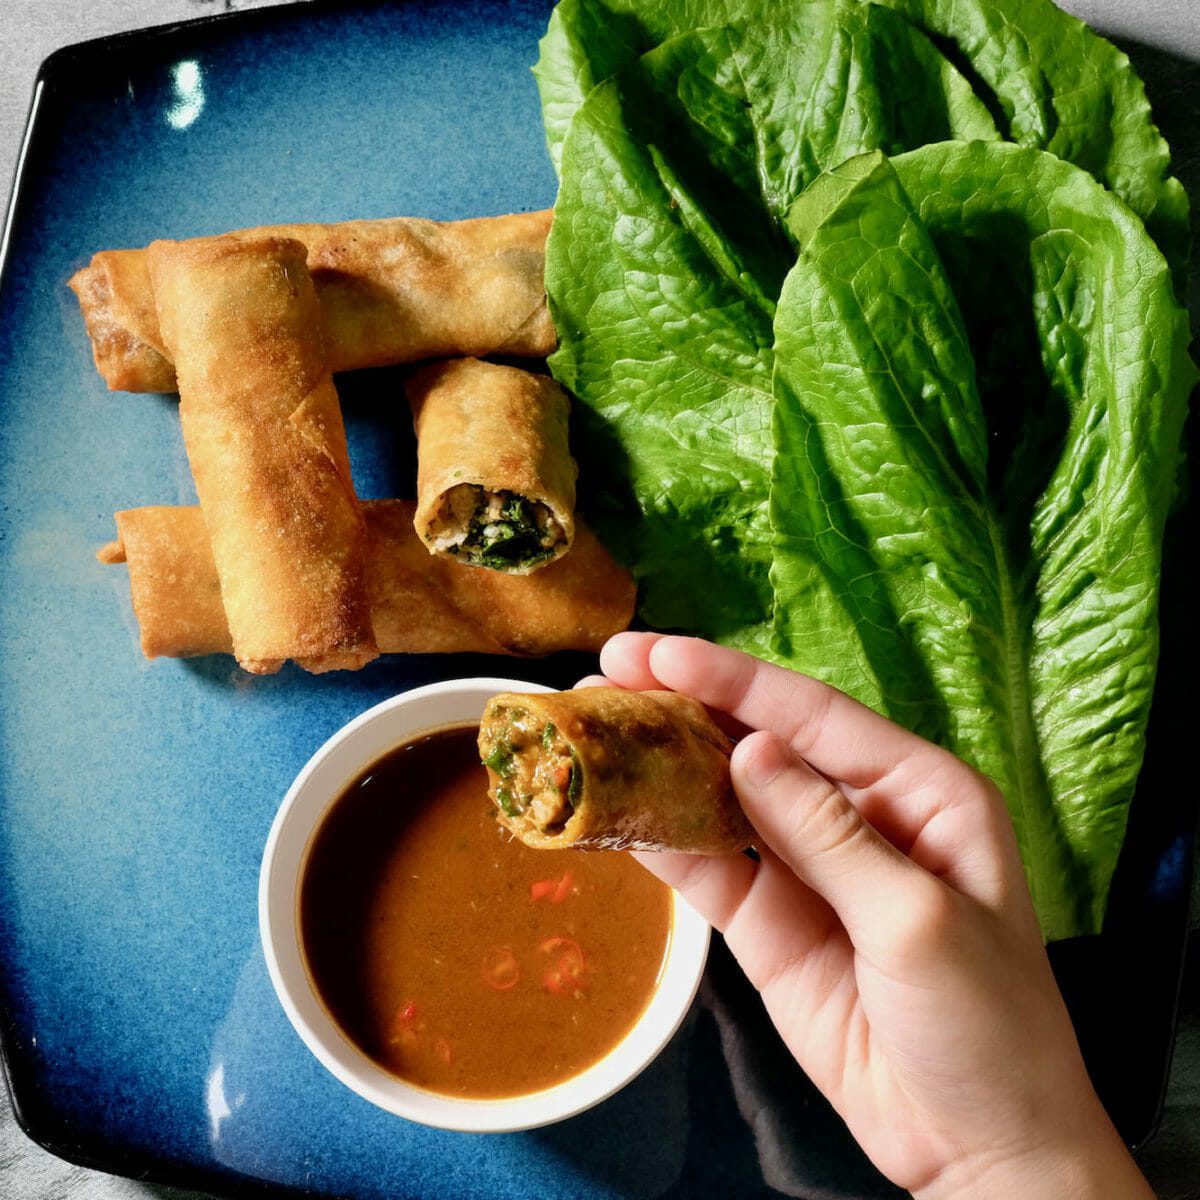 Duck and herb spring rolls. Very special dipping sauce. - delectabilia